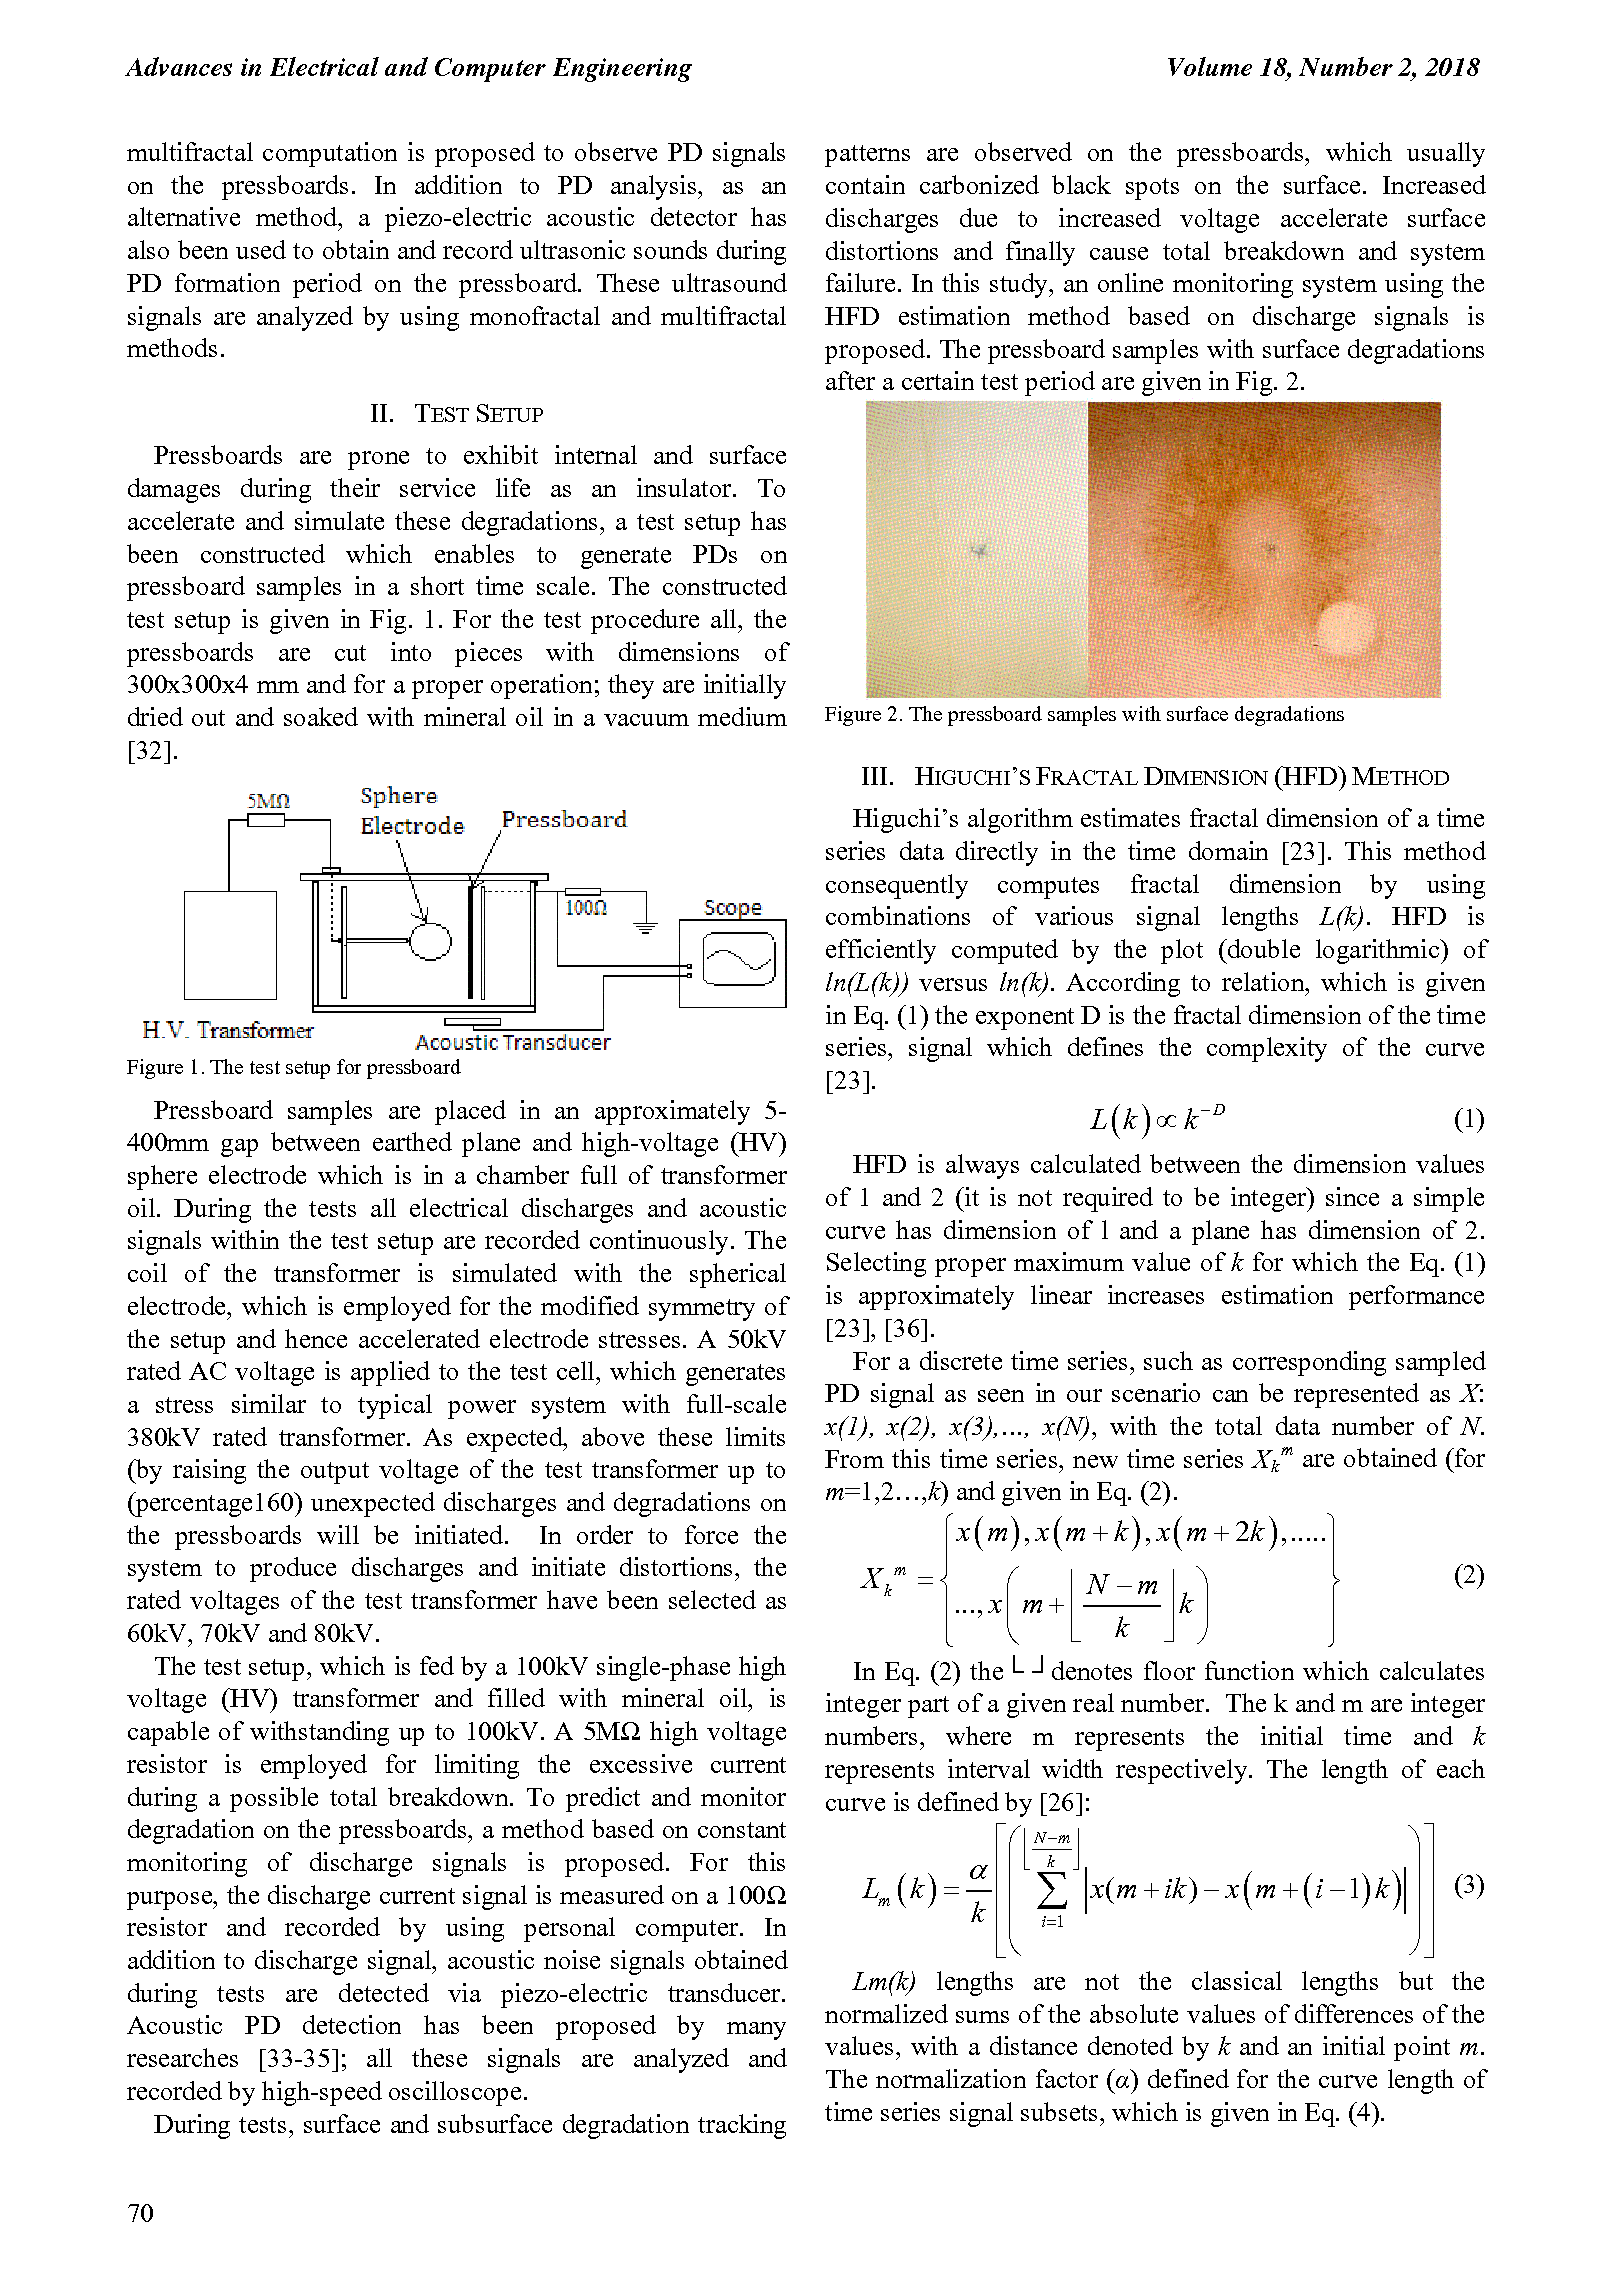 PDF Quickview for paper with DOI:10.4316/AECE.2018.02009